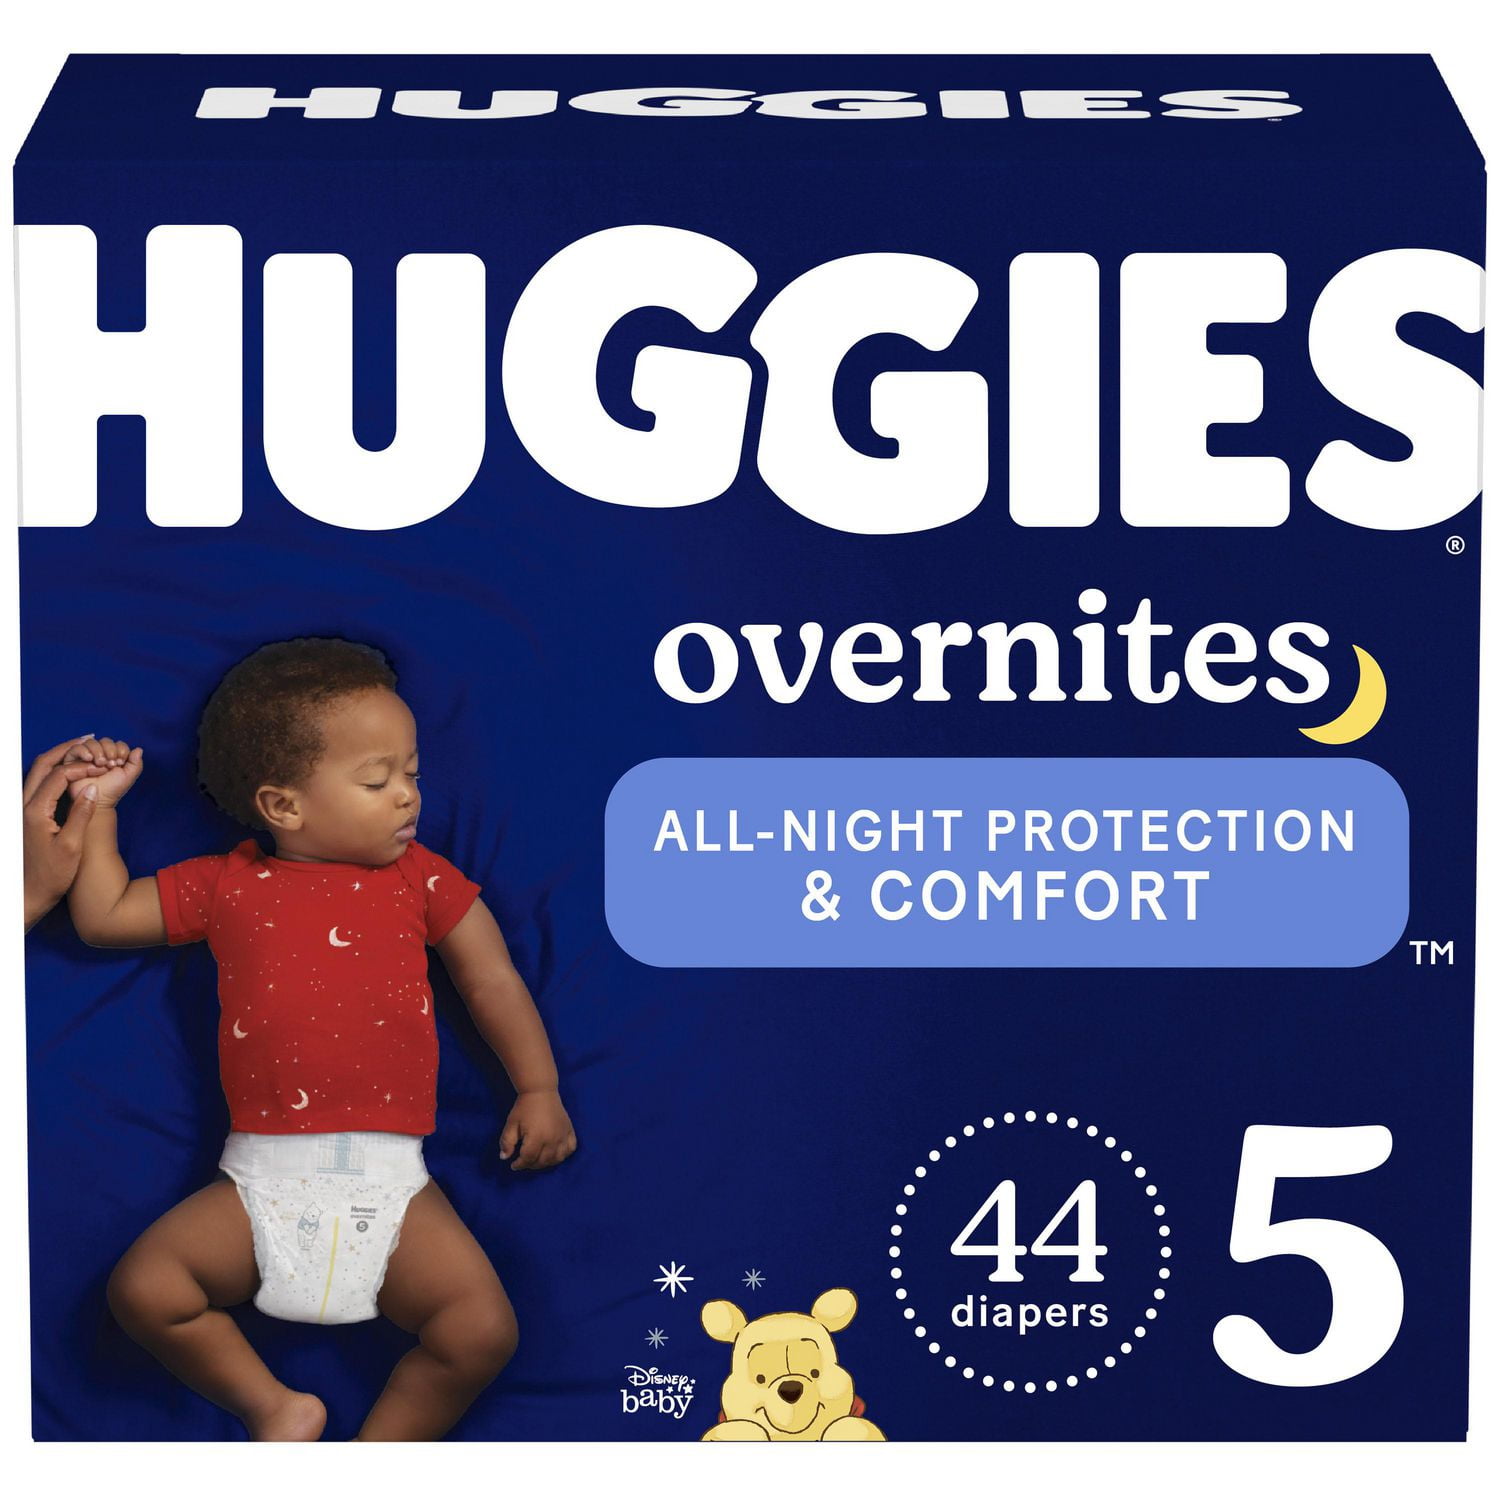 Pampers Premium Care Size 6 16+kg Pants 36 Pack, Potty Training & Pull Up  Nappies, Nappies, Baby